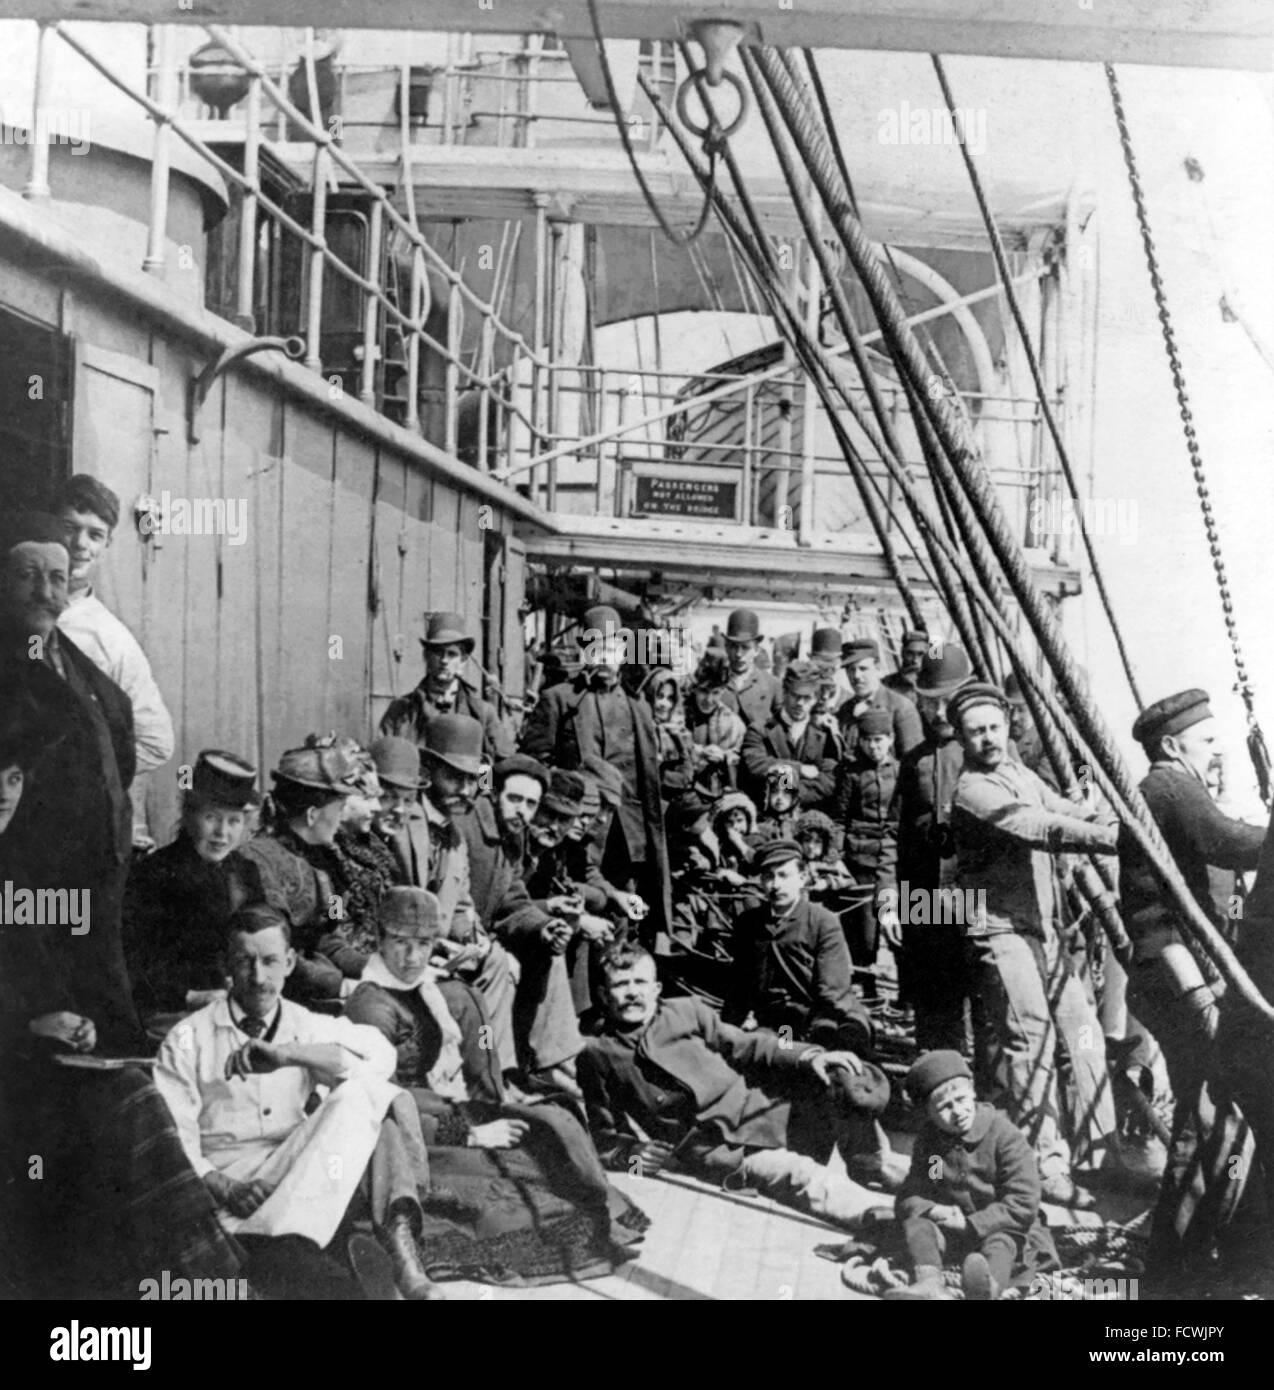 Emigrants to the USA on the lower deck of a ship at sea, c.1890 Stock Photo